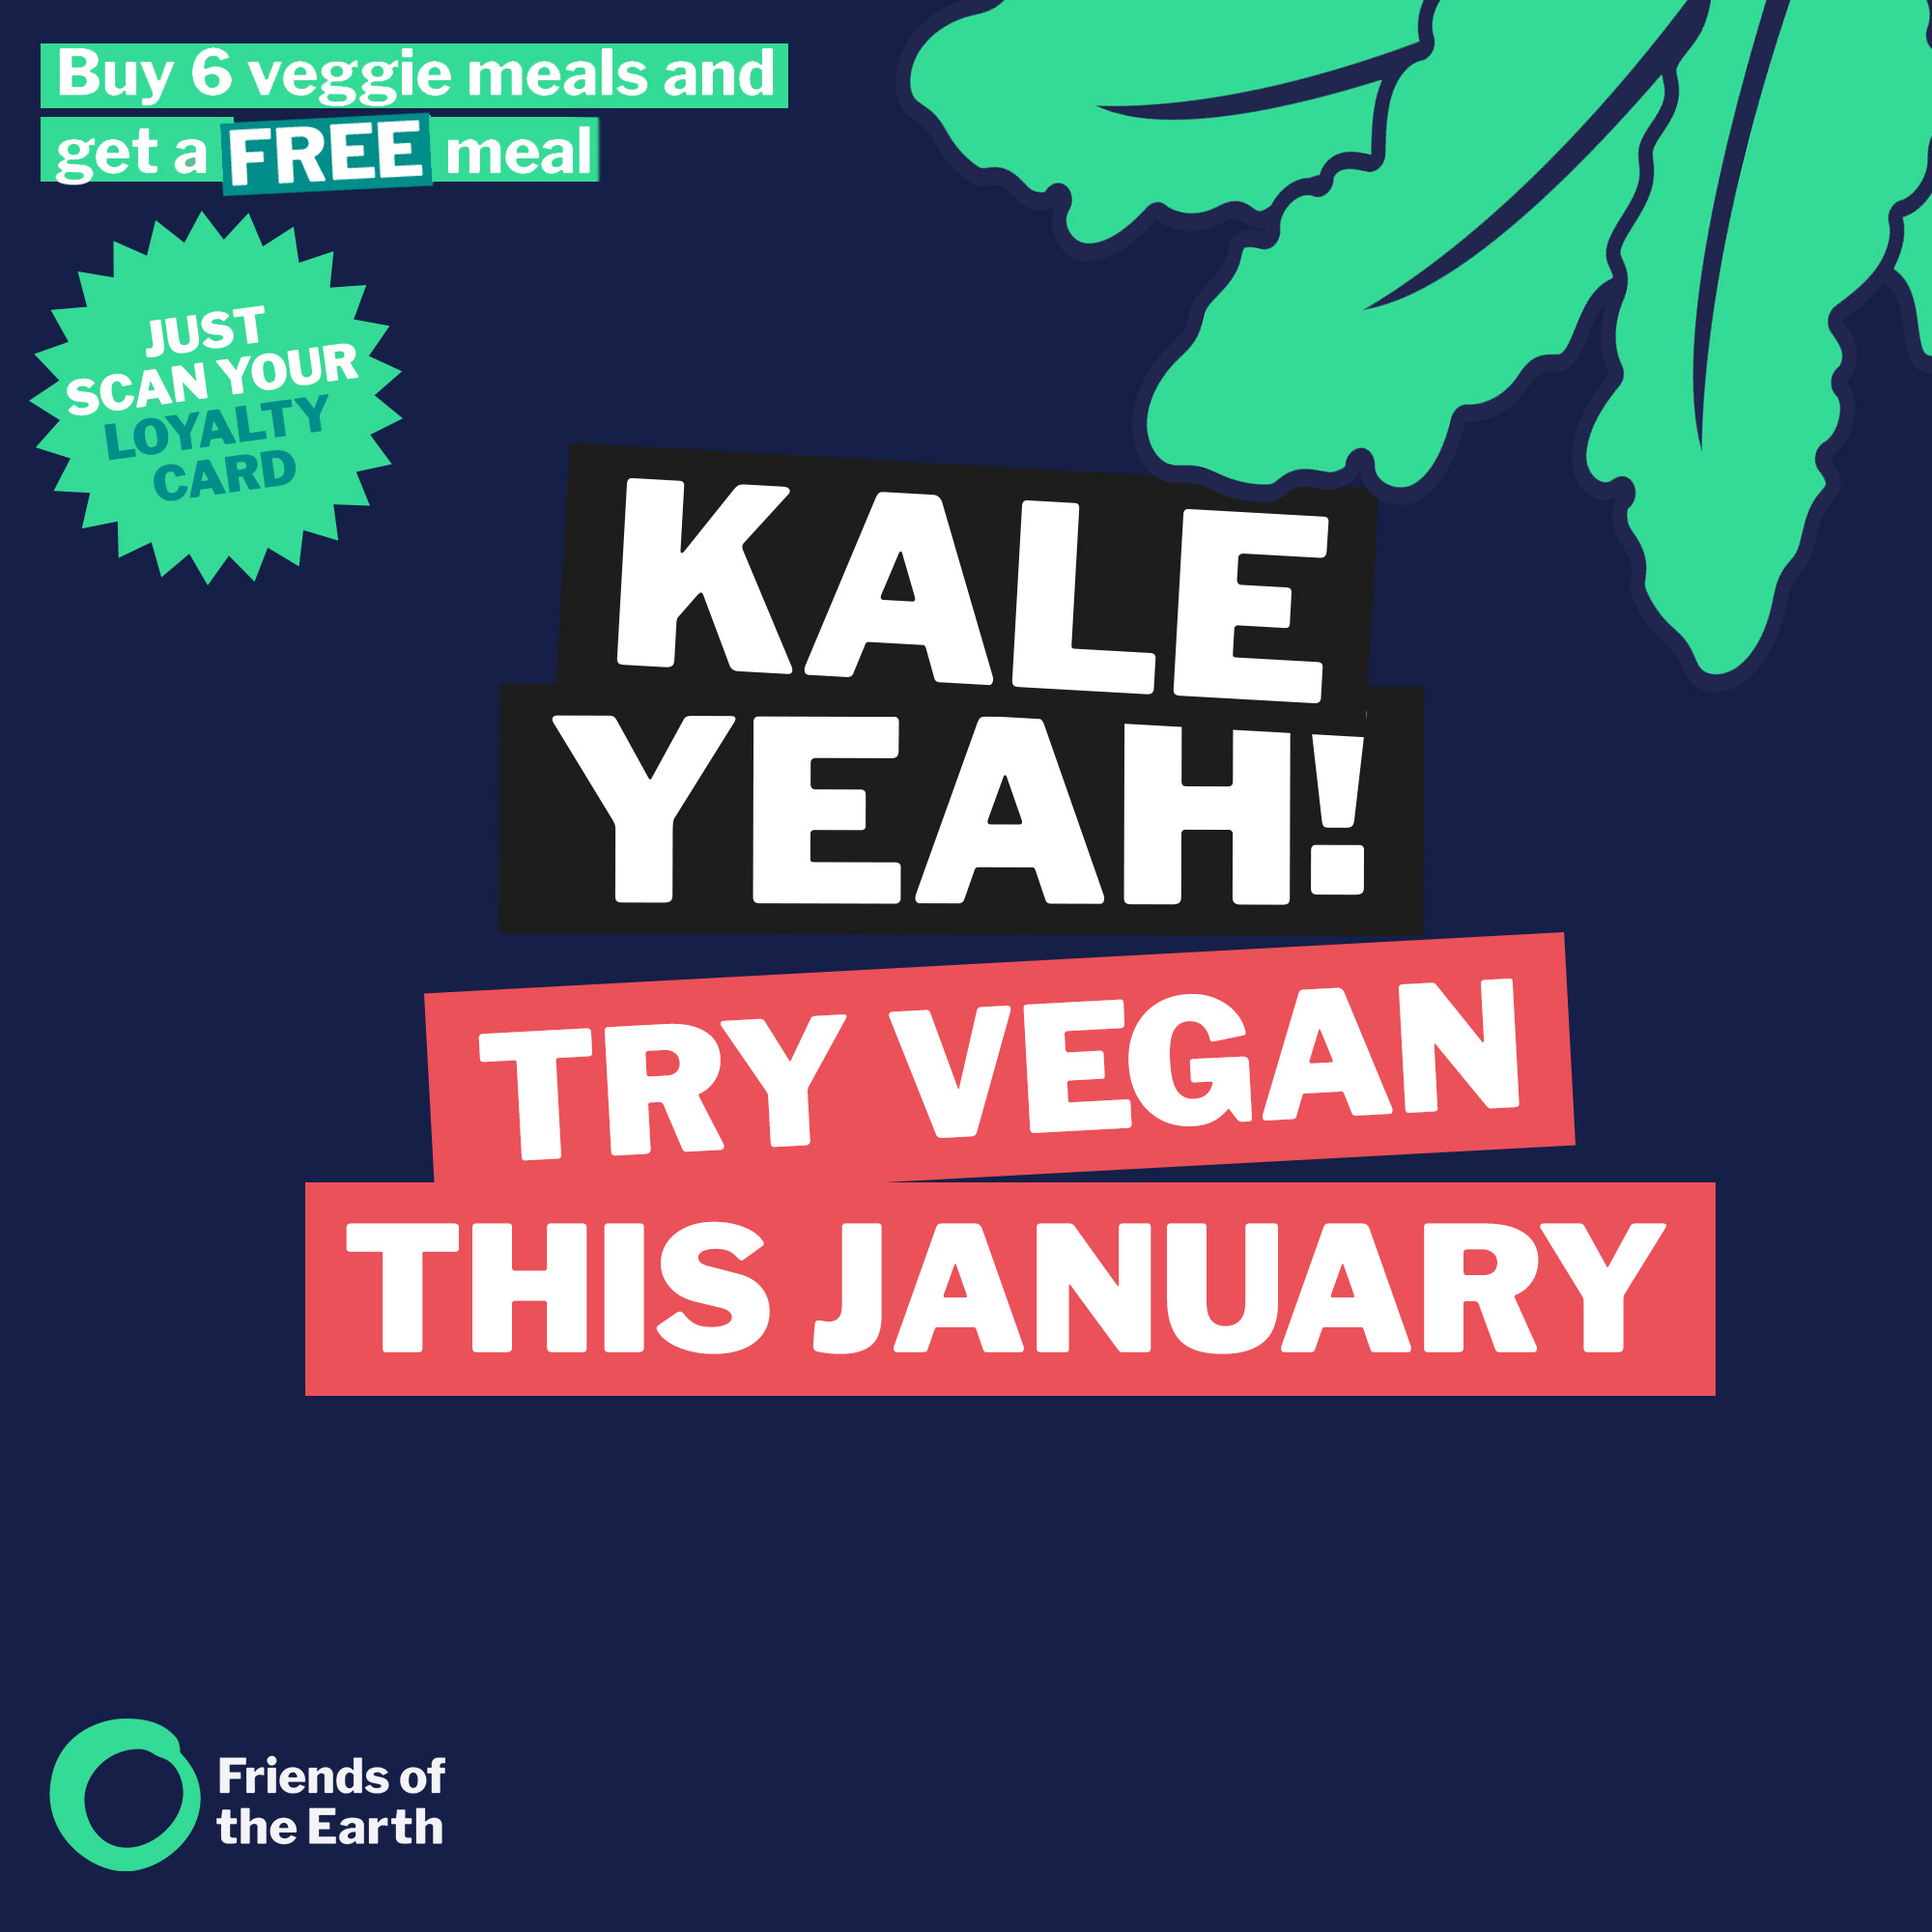 An image that read "Kale Yeah! Try vegan this January" and also explains the loyalty scheme